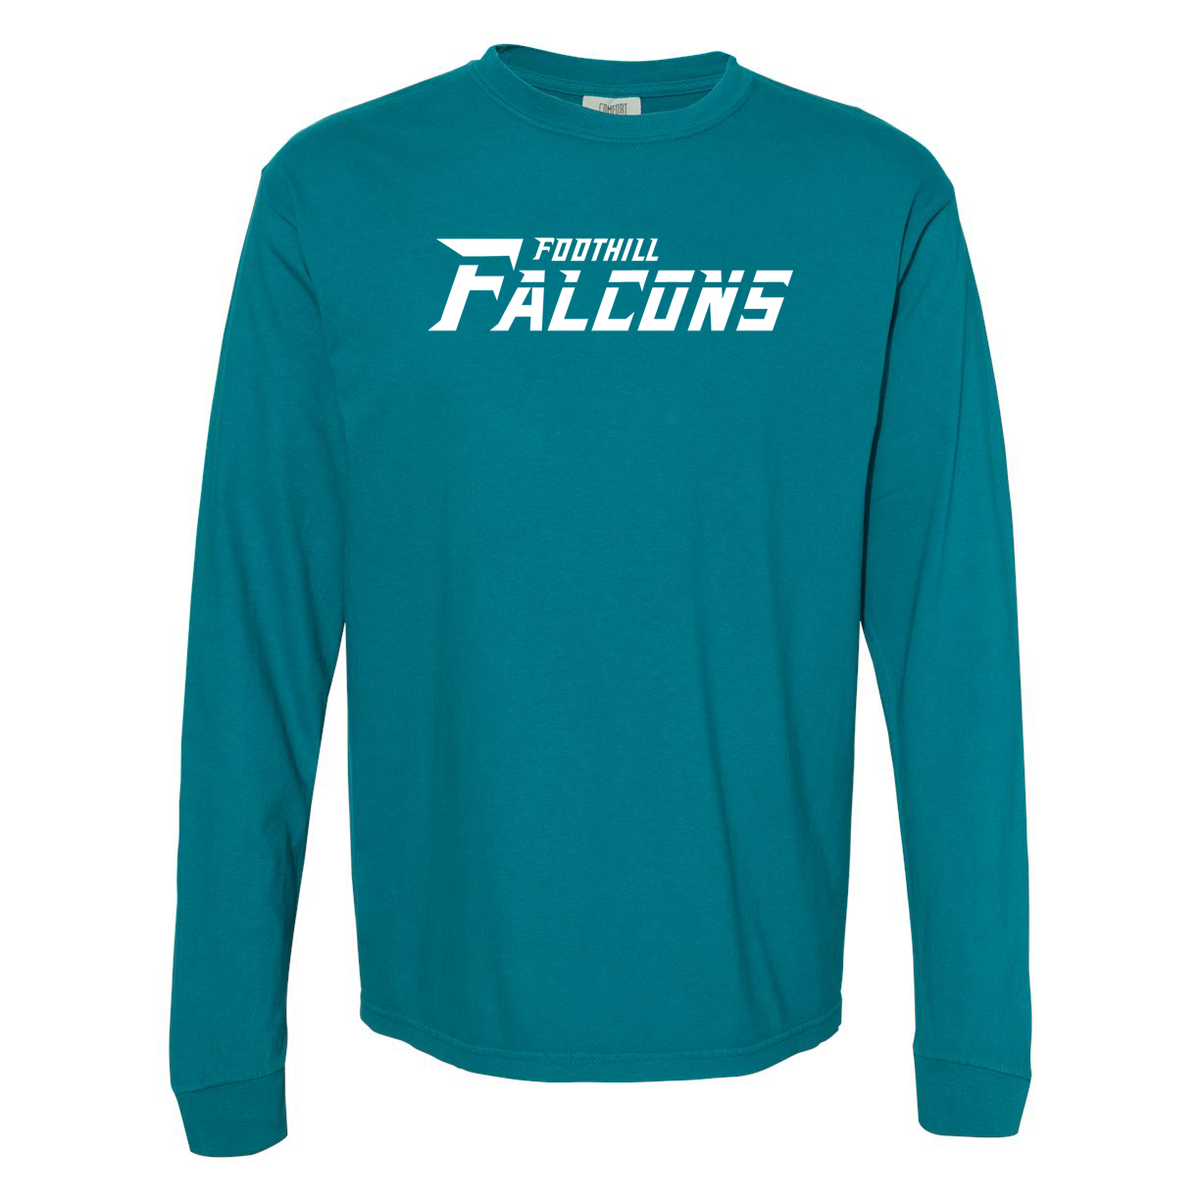 Foothill Falcons Garment Dyed Long Sleeve Tee